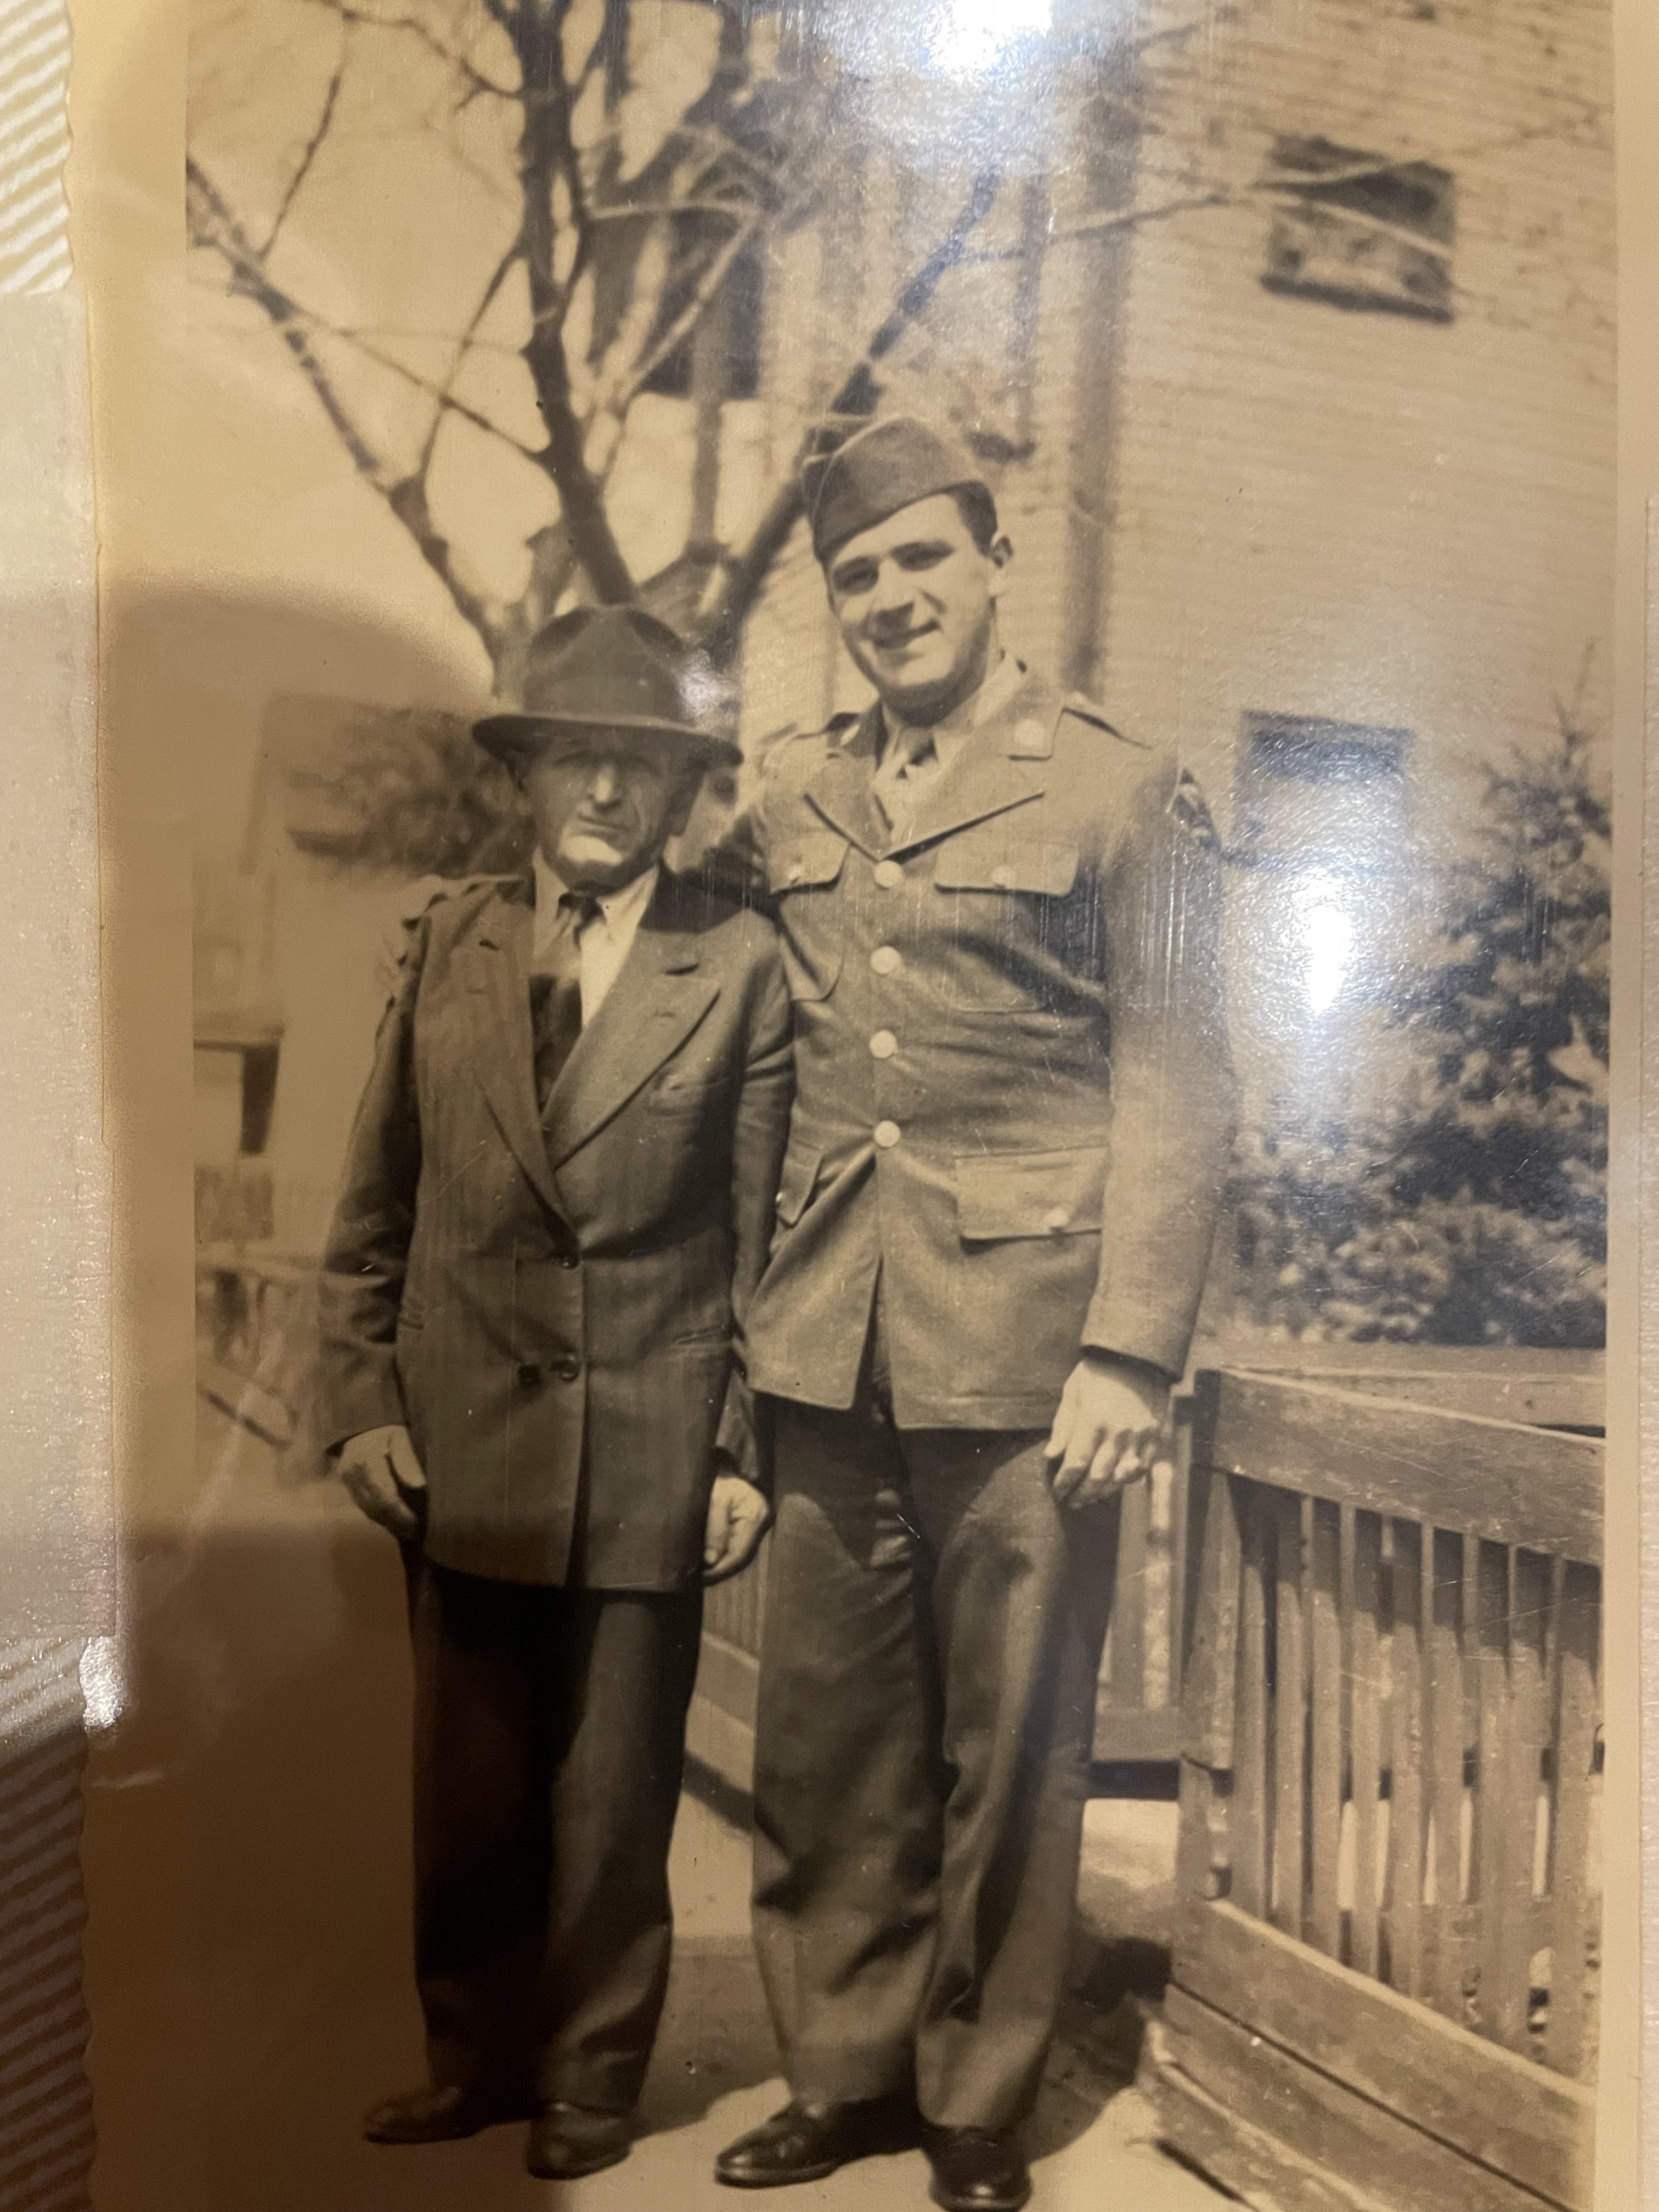 My father with his father who immigrated from Lithuania in 1910